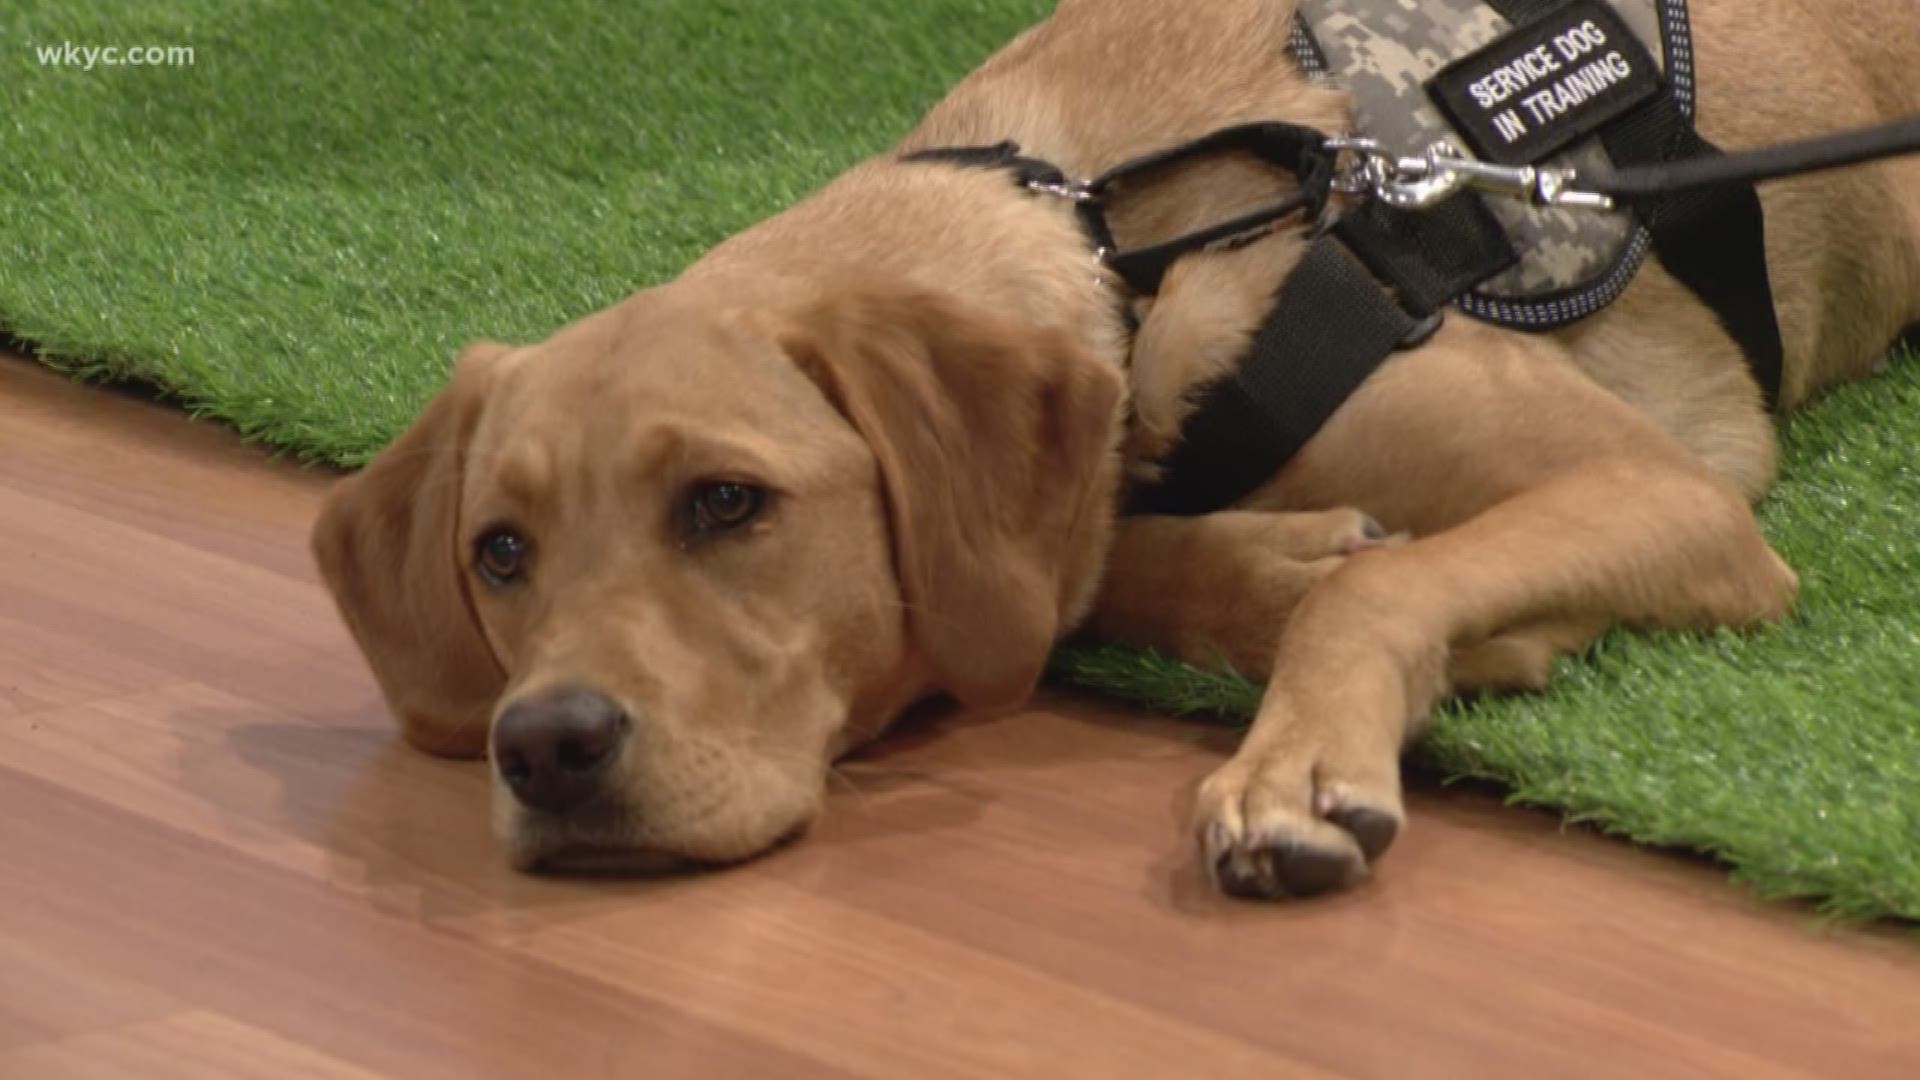 Aug. 6, 2019: Roxy is getting closer to being paired with a veteran as her Wags 4 Warriors training continues. This week, Roxy is joining us in celebration of International Assistance Dog Week.